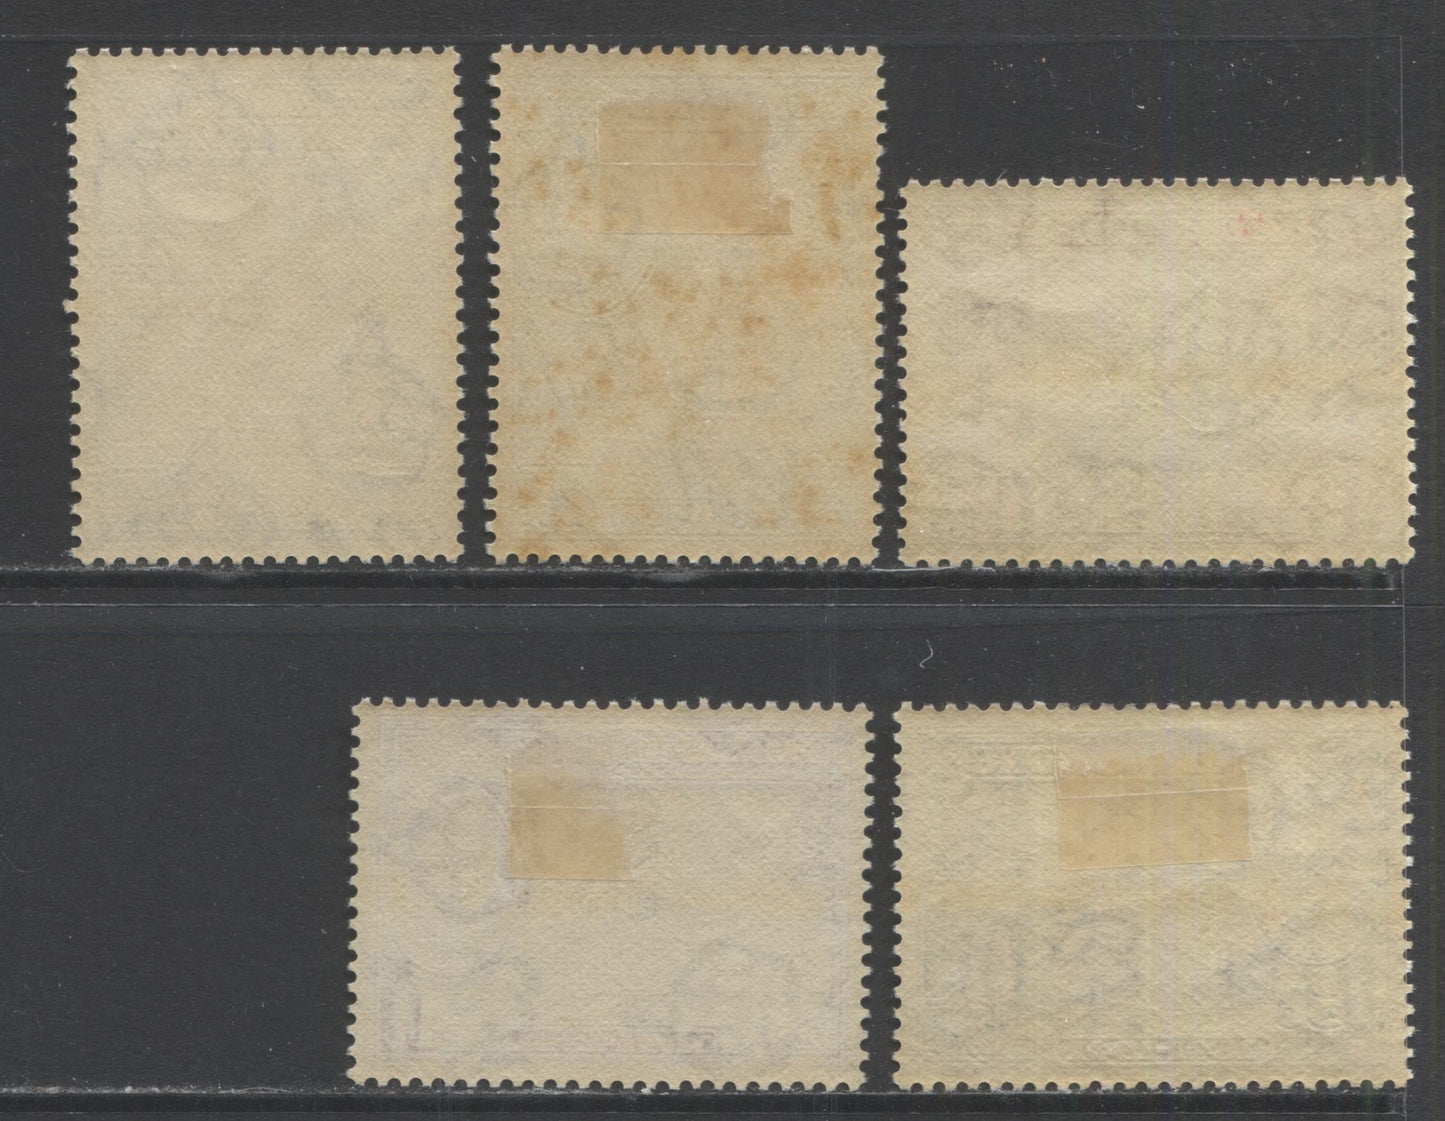 Lot 25 Hong Kong SC#168-172 1941 Centenary Issue, A VFLH Range Of Singles, 2017 Scott Cat. $29.25 USD, Click on Listing to See ALL Pictures